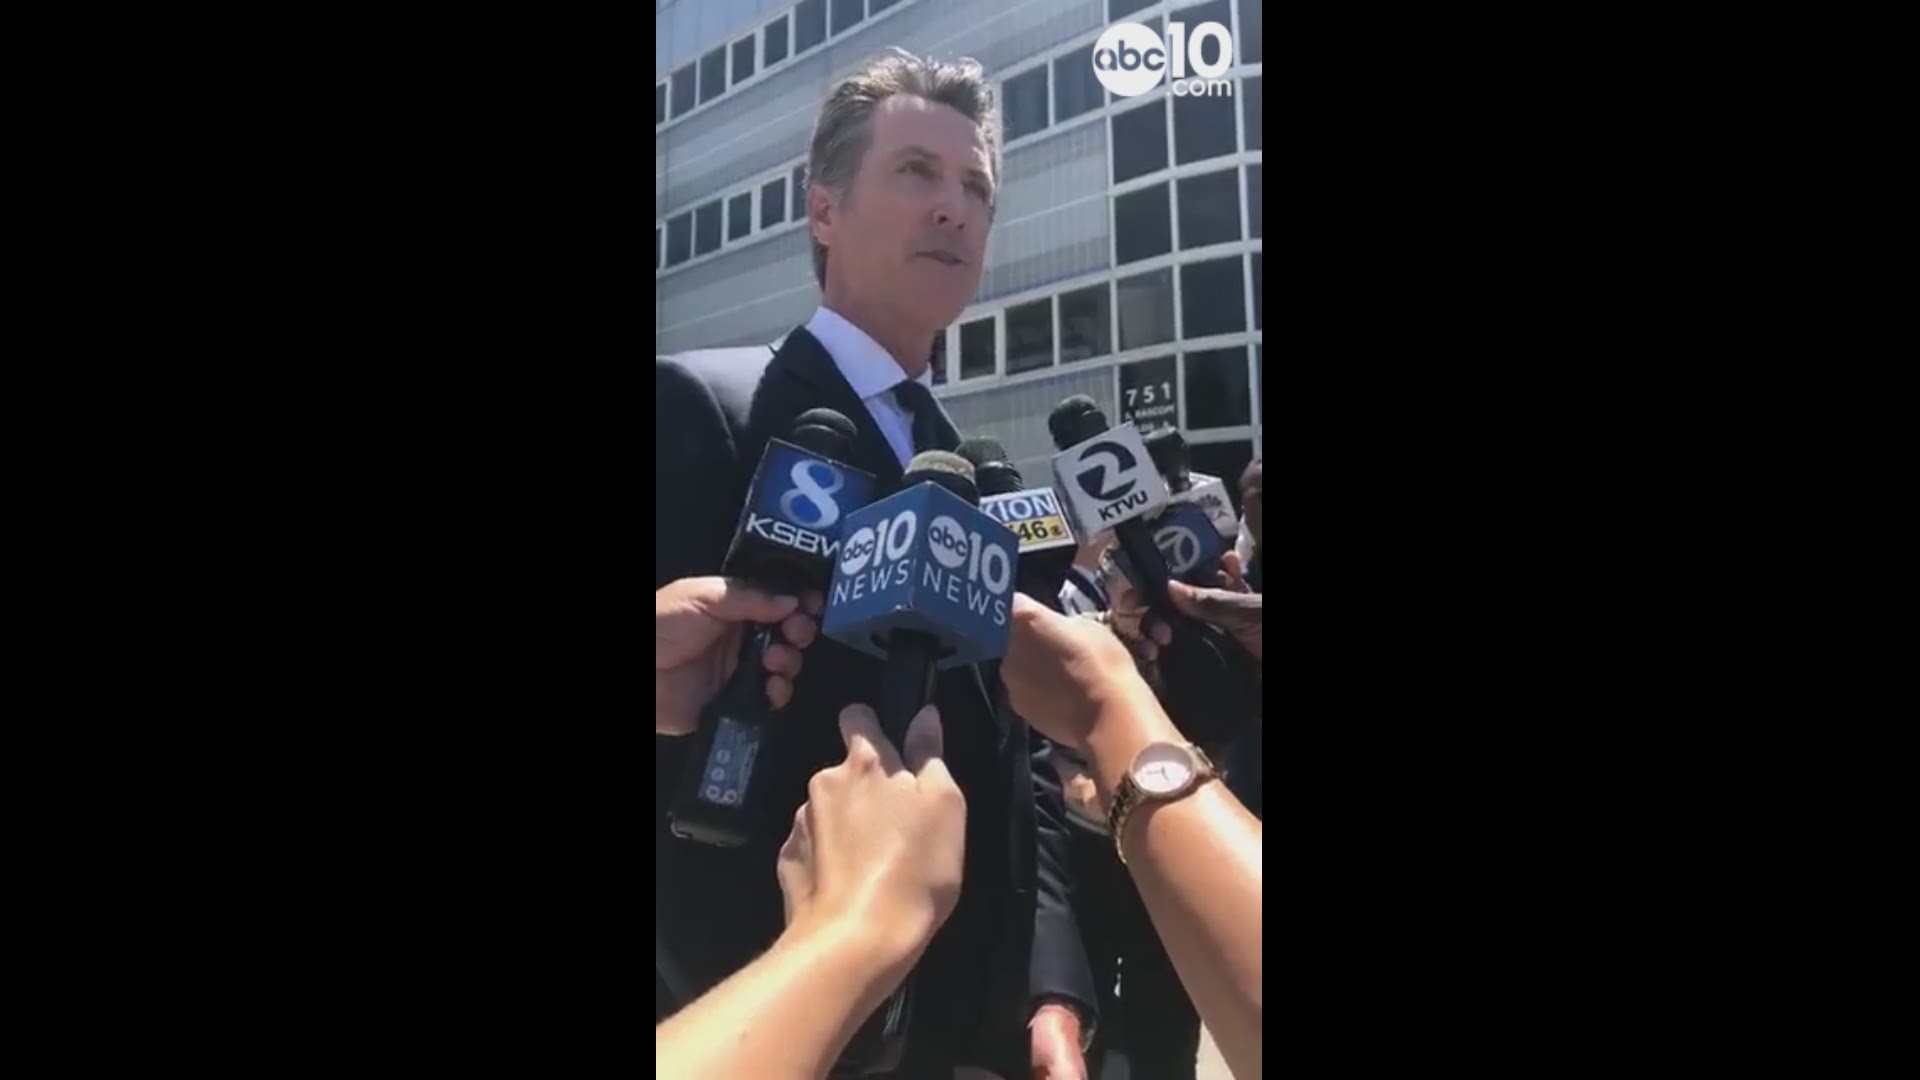 California Governor Gavin Newsom gave an update on the Gilroy Garlic Festival shooting while visiting victims at the Santa Clara Valley Medical Center. The Governor also talked about guns and hate crimes.